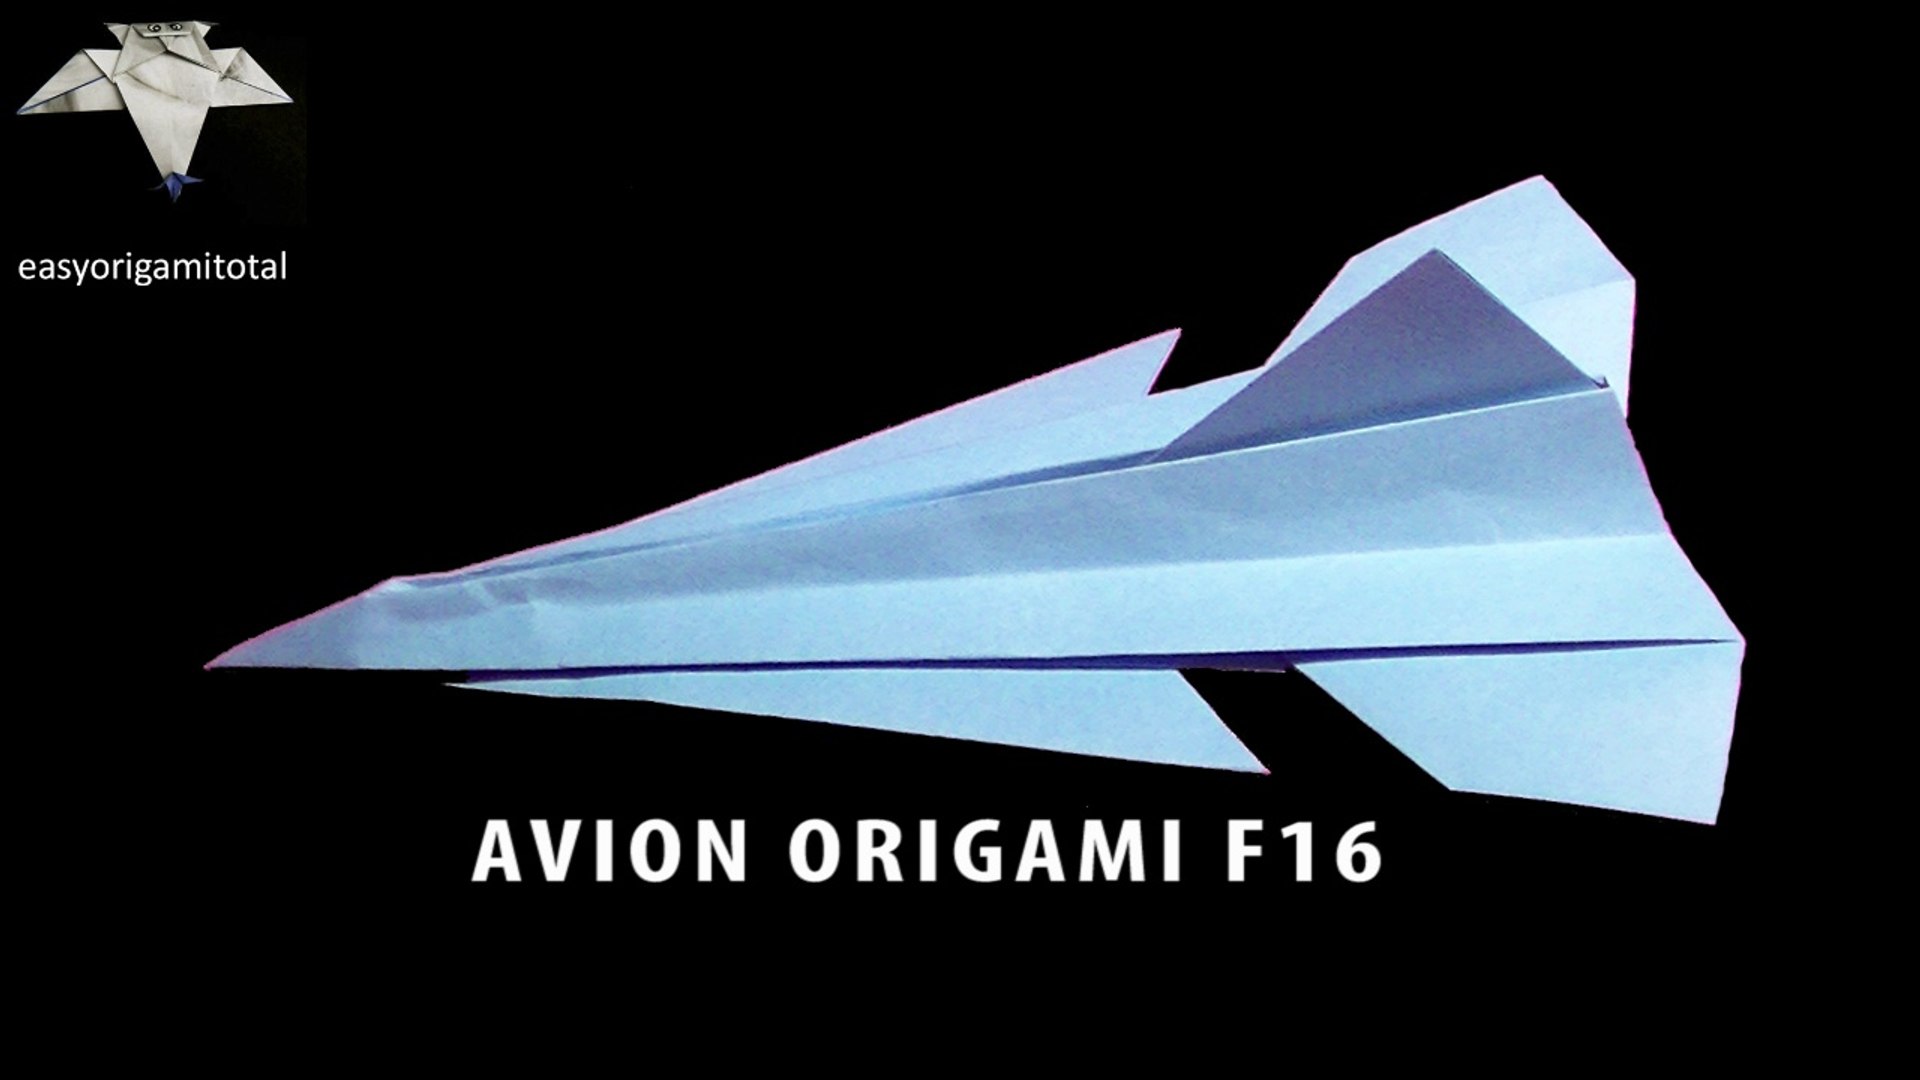 AVION ORIGAMI DE COMBATE TIPO F16 - video Dailymotion